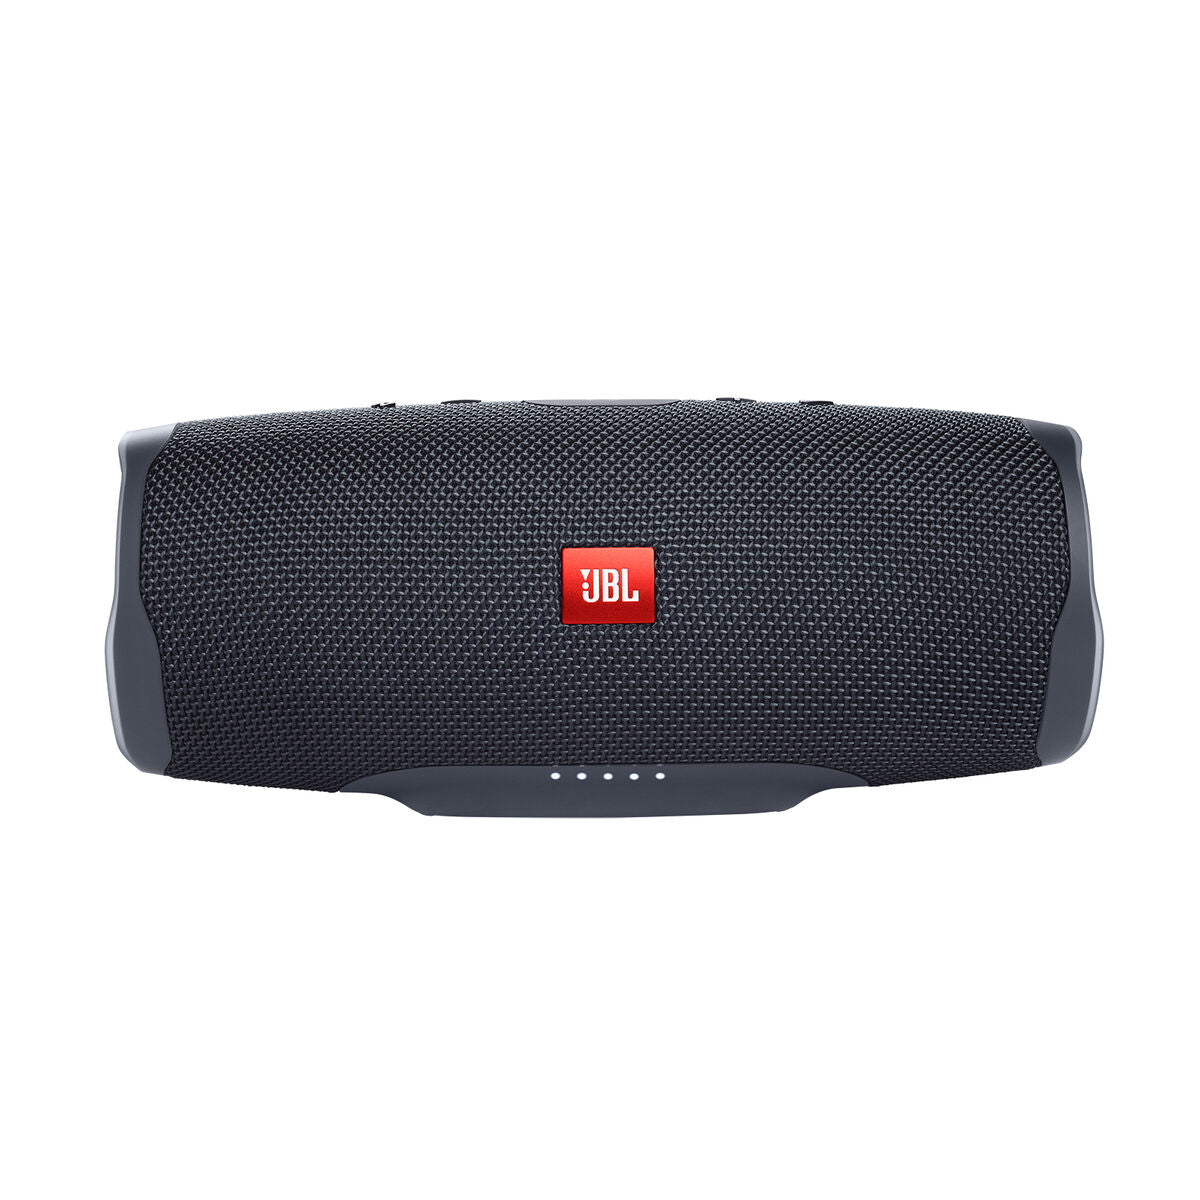 Bluetooth Speakers JBL JBLCHARGEES2 40 W Black, JBL, Electronics, Mobile communication and accessories, bluetooth-speakers-jbl-jblchargees2-40-w-black, Brand_JBL, category-reference-2609, category-reference-2882, category-reference-2923, category-reference-t-19653, category-reference-t-21311, category-reference-t-25527, category-reference-t-4036, category-reference-t-4037, Condition_NEW, entertainment, music, Price_100 - 200, telephones & tablets, wifi y bluetooth, RiotNook